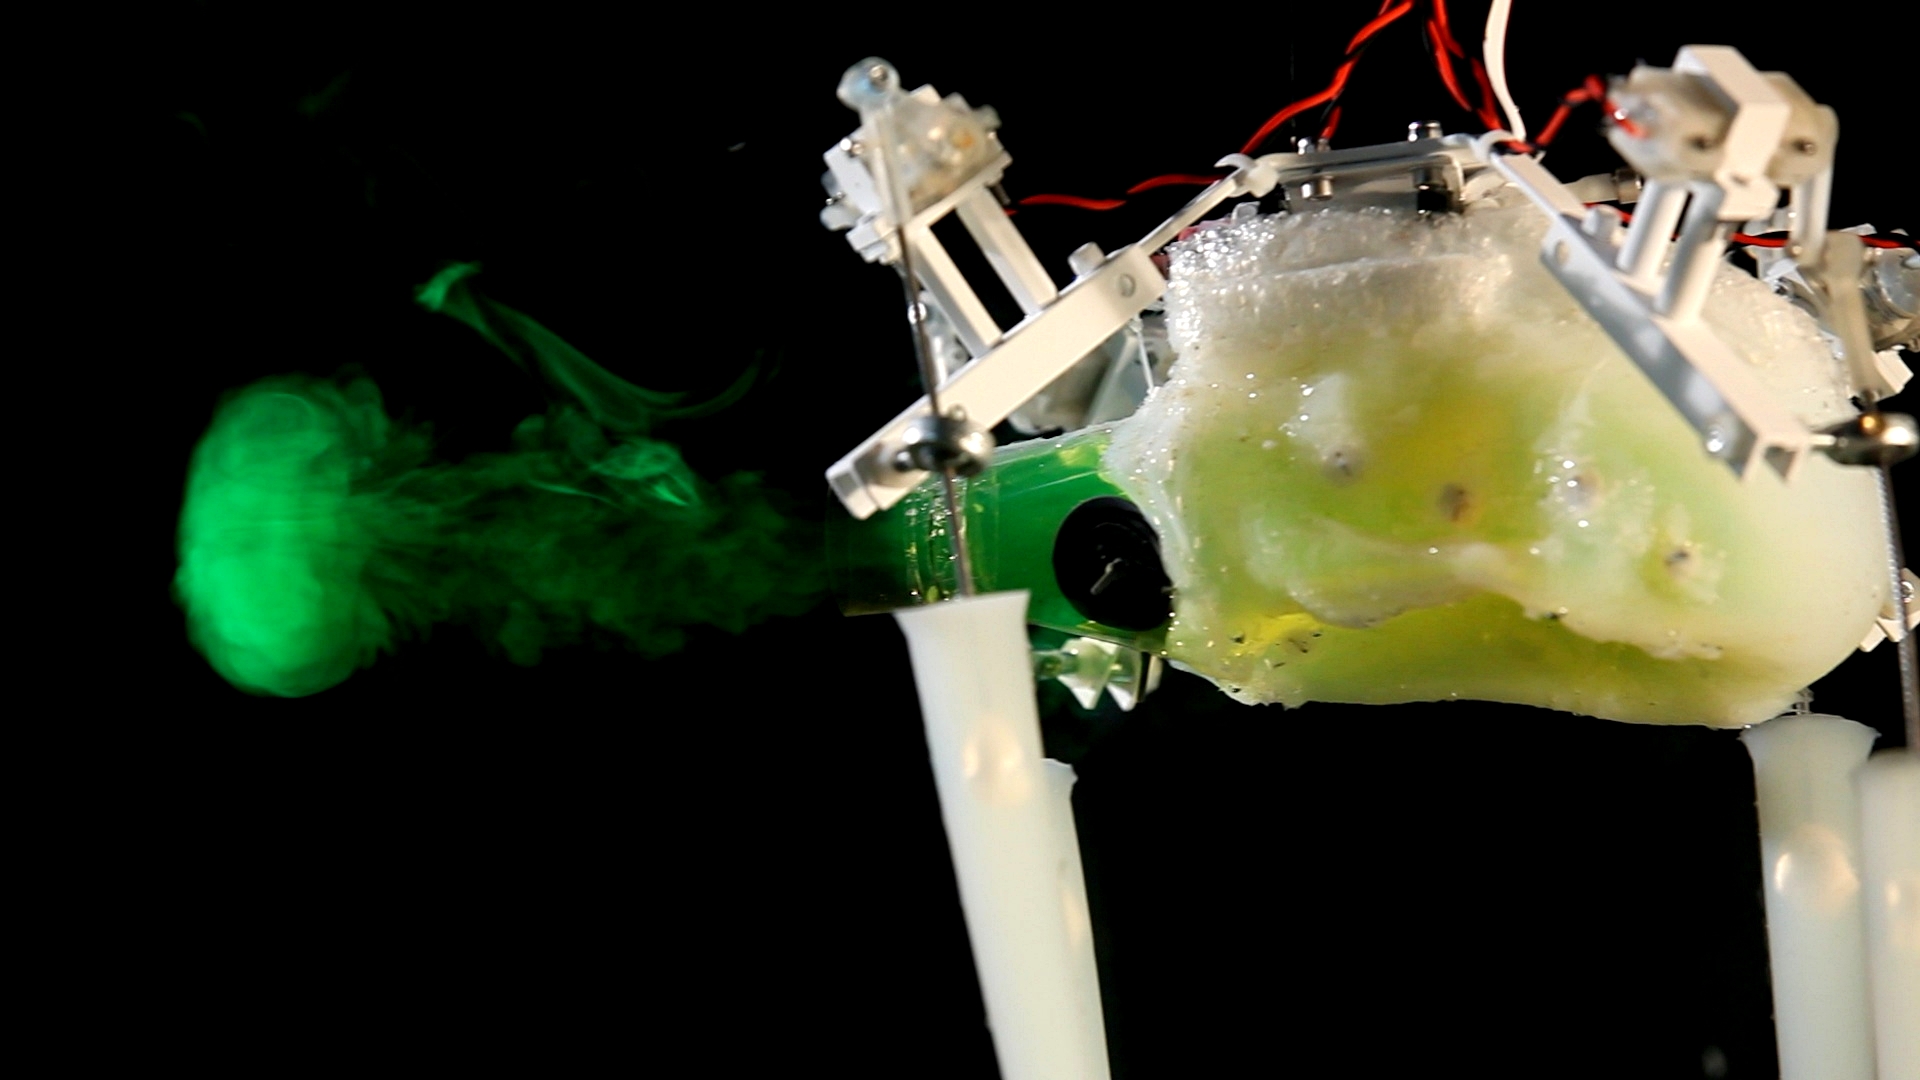 The researchers put cables and a small motor inside a flexible rubber shell, which can easily fill up and expel water. Image credit: Age of Robots, M. Brega